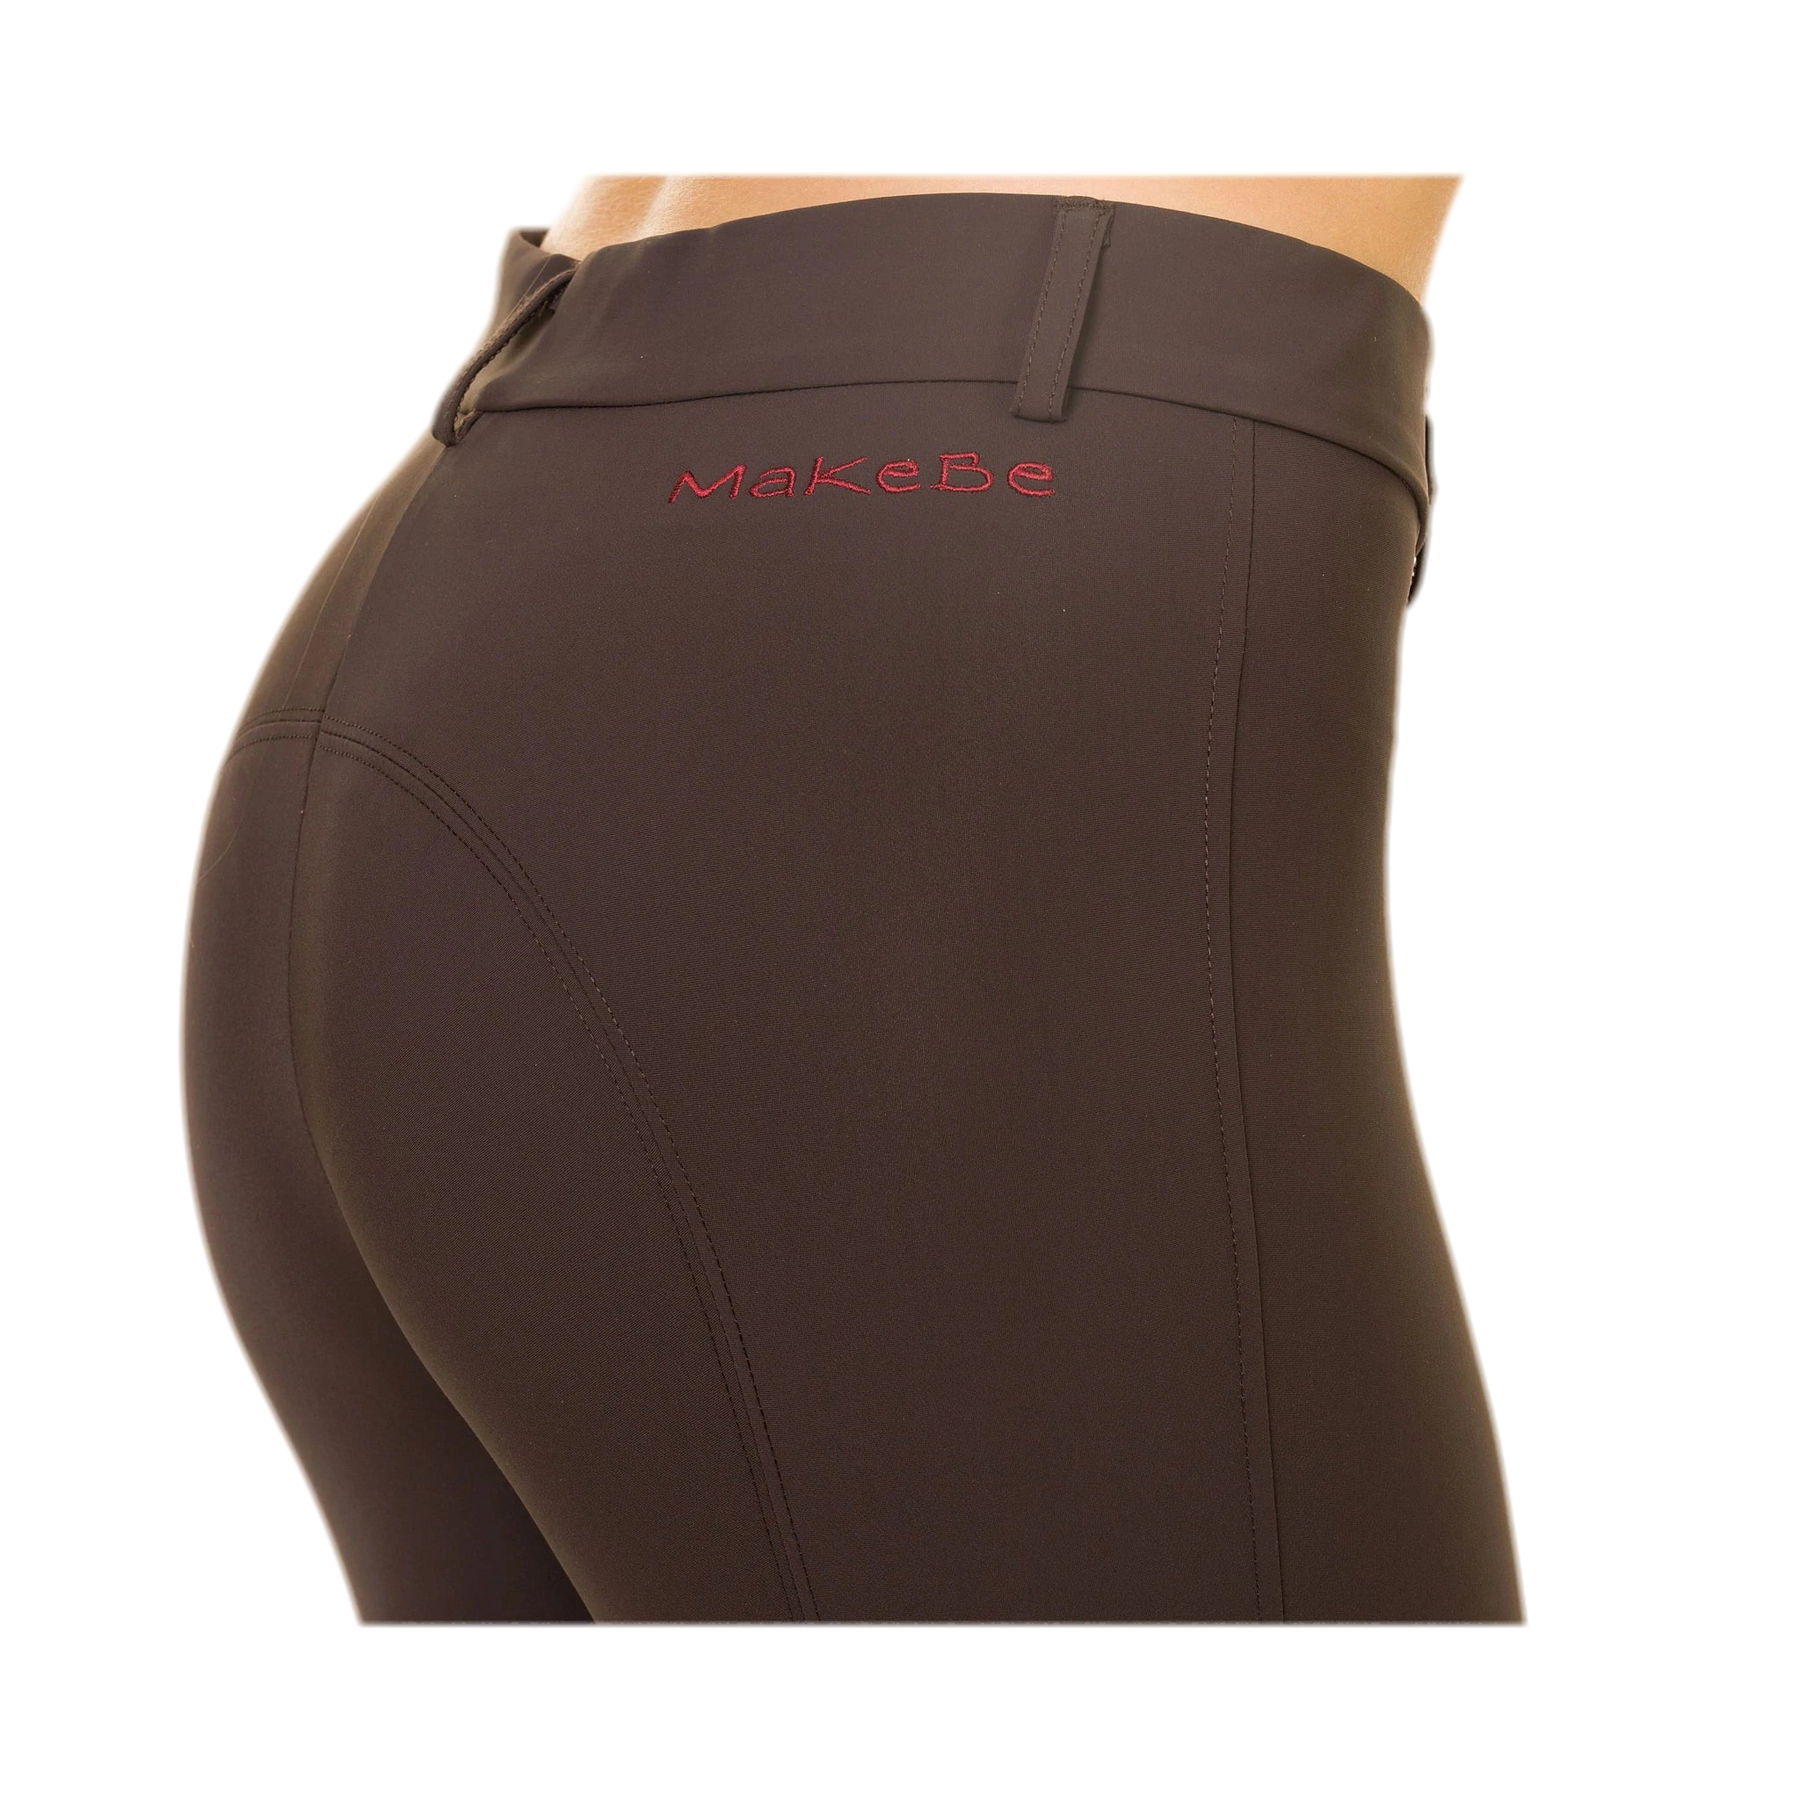 The Penelope Riding Jump Breeches